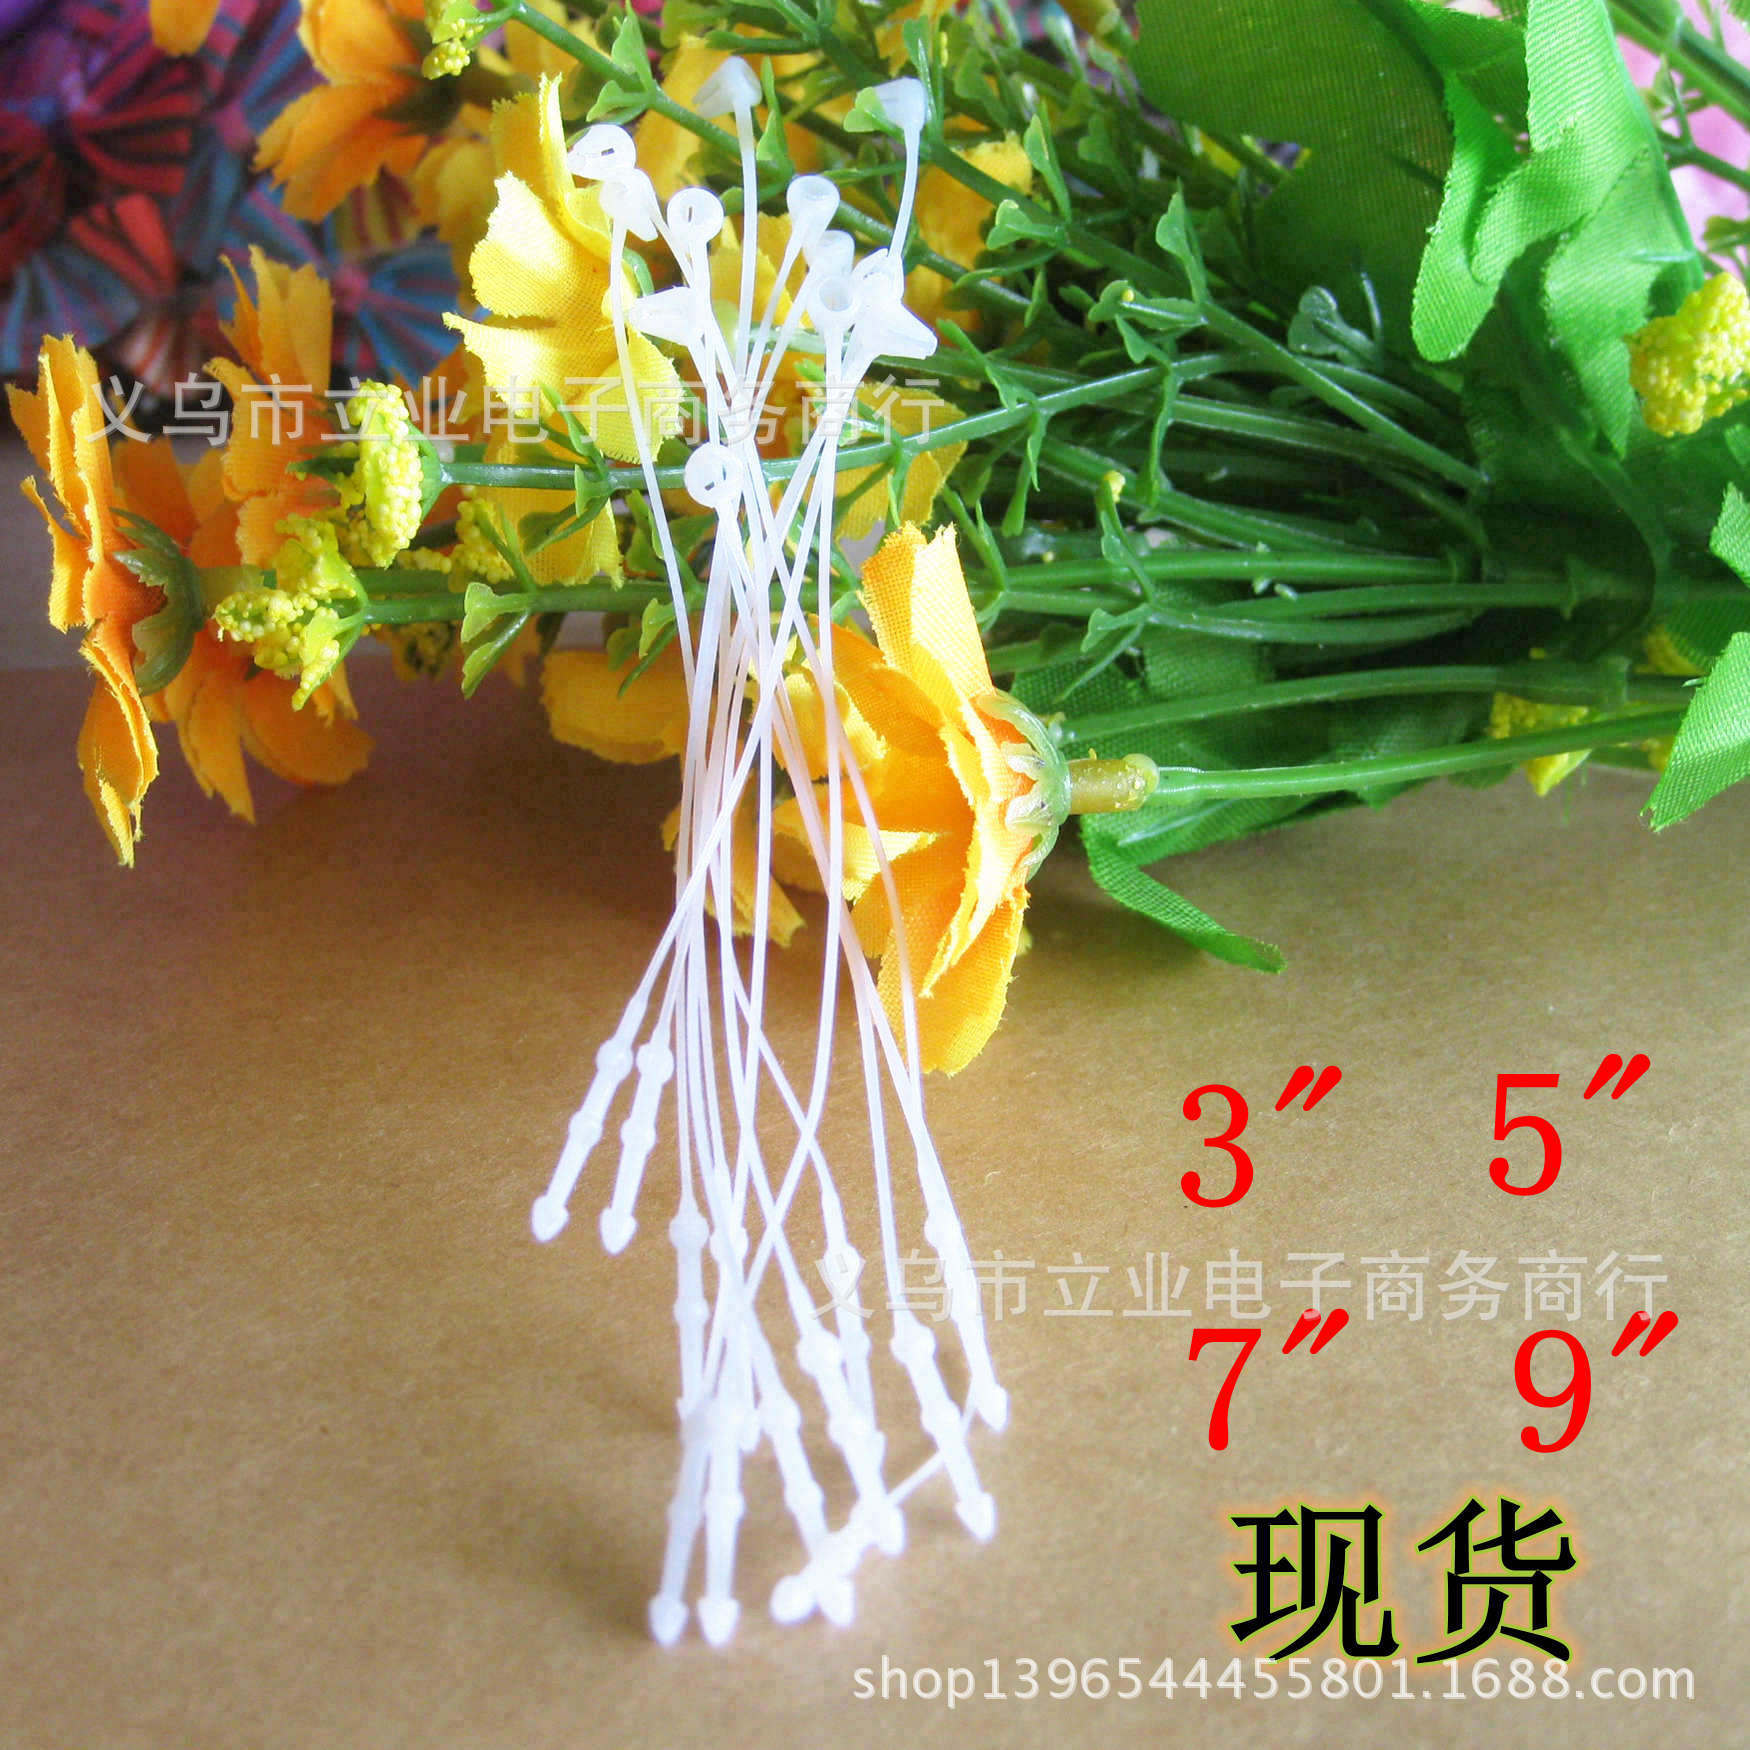 Wholesale Supply Universal hand piercing needle Plastic Picture Clasp hands Wearing rope Clothing tag rope Clothing hanging tablets goods in stock